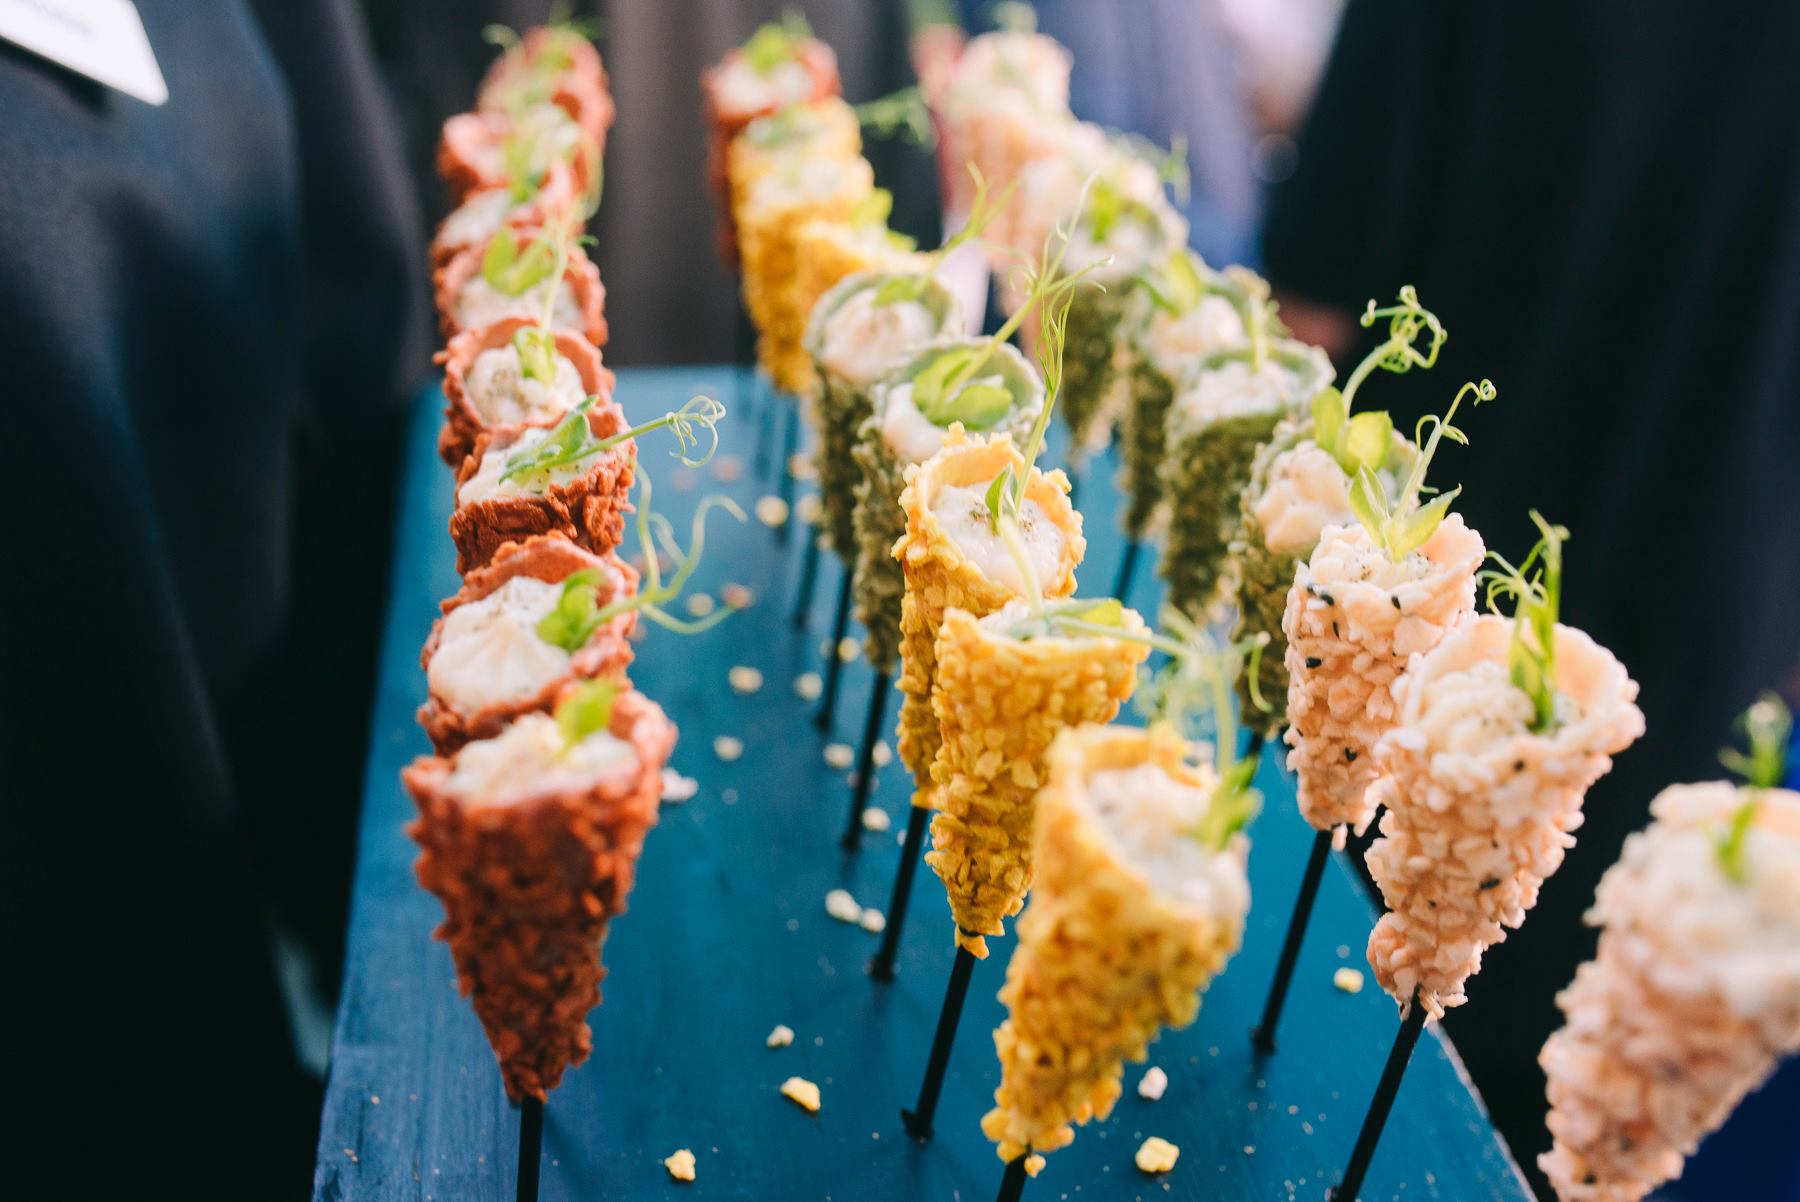 Savoury canape cones from Creative Catering Perth